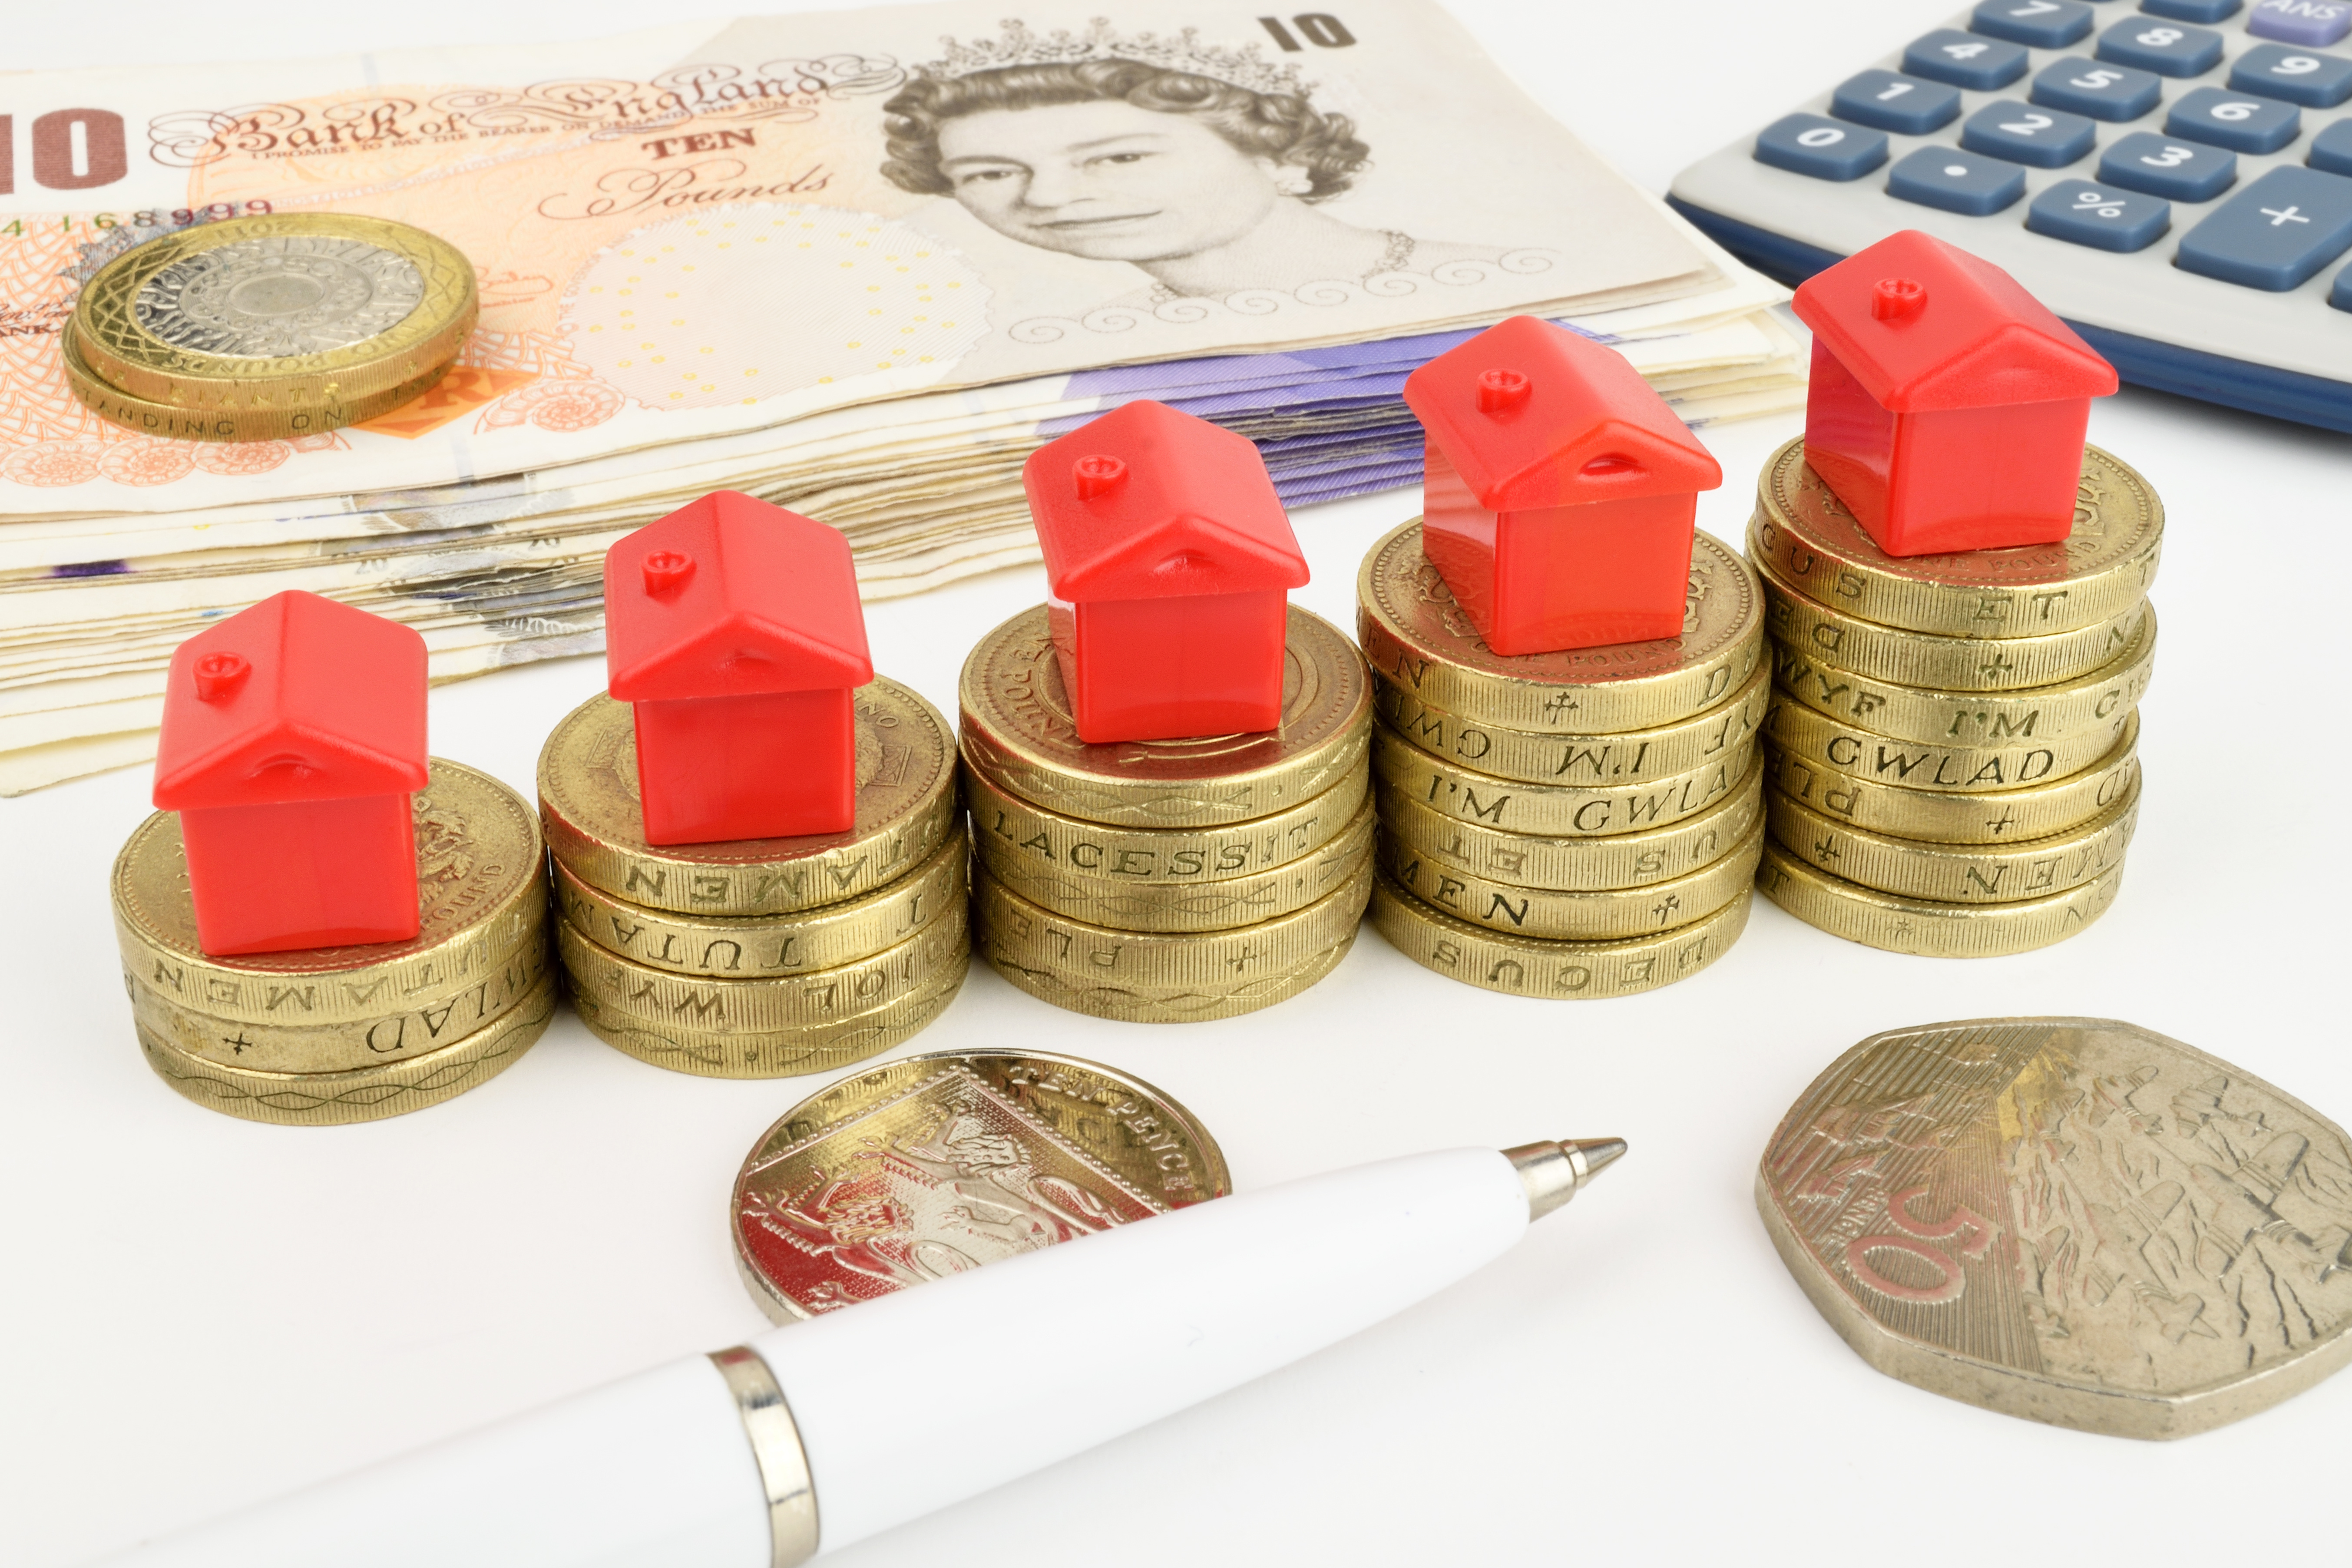 'Transaction levels remained steady over summer' - HMRC